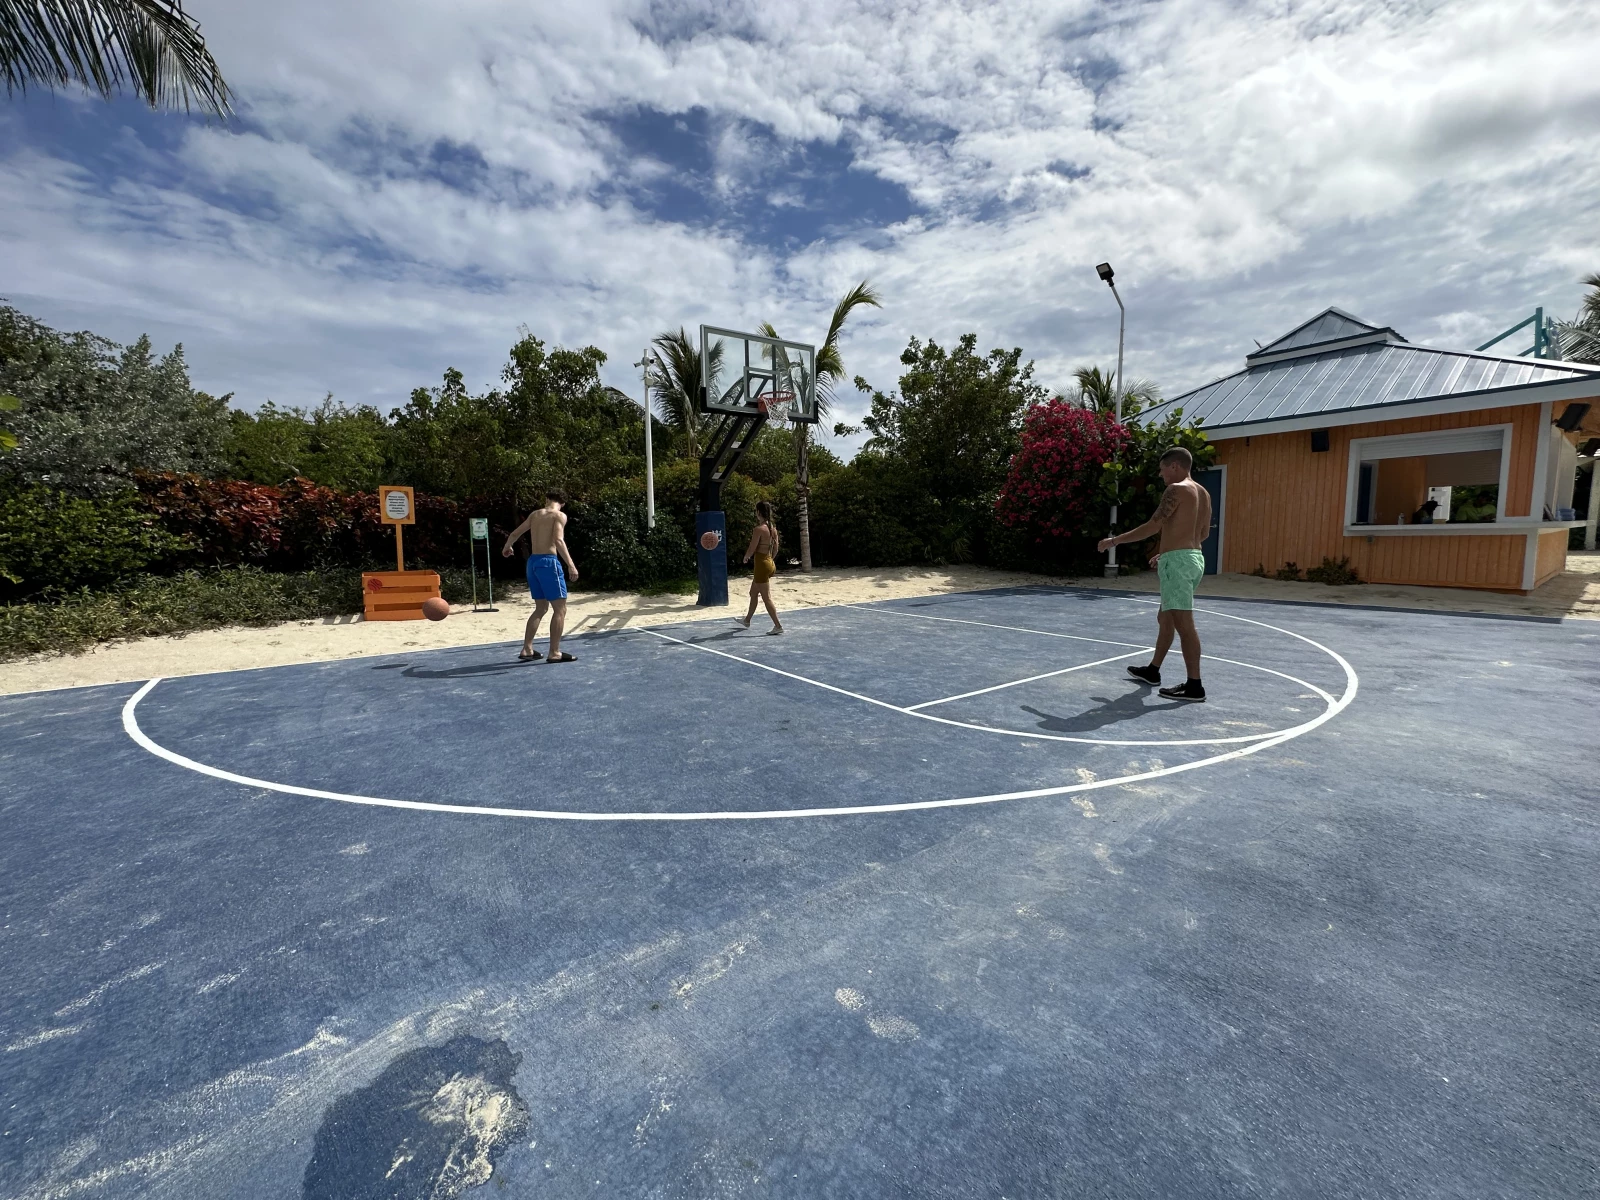 Bullock Harbour Basketball Court: South Beach Court Courts of the World